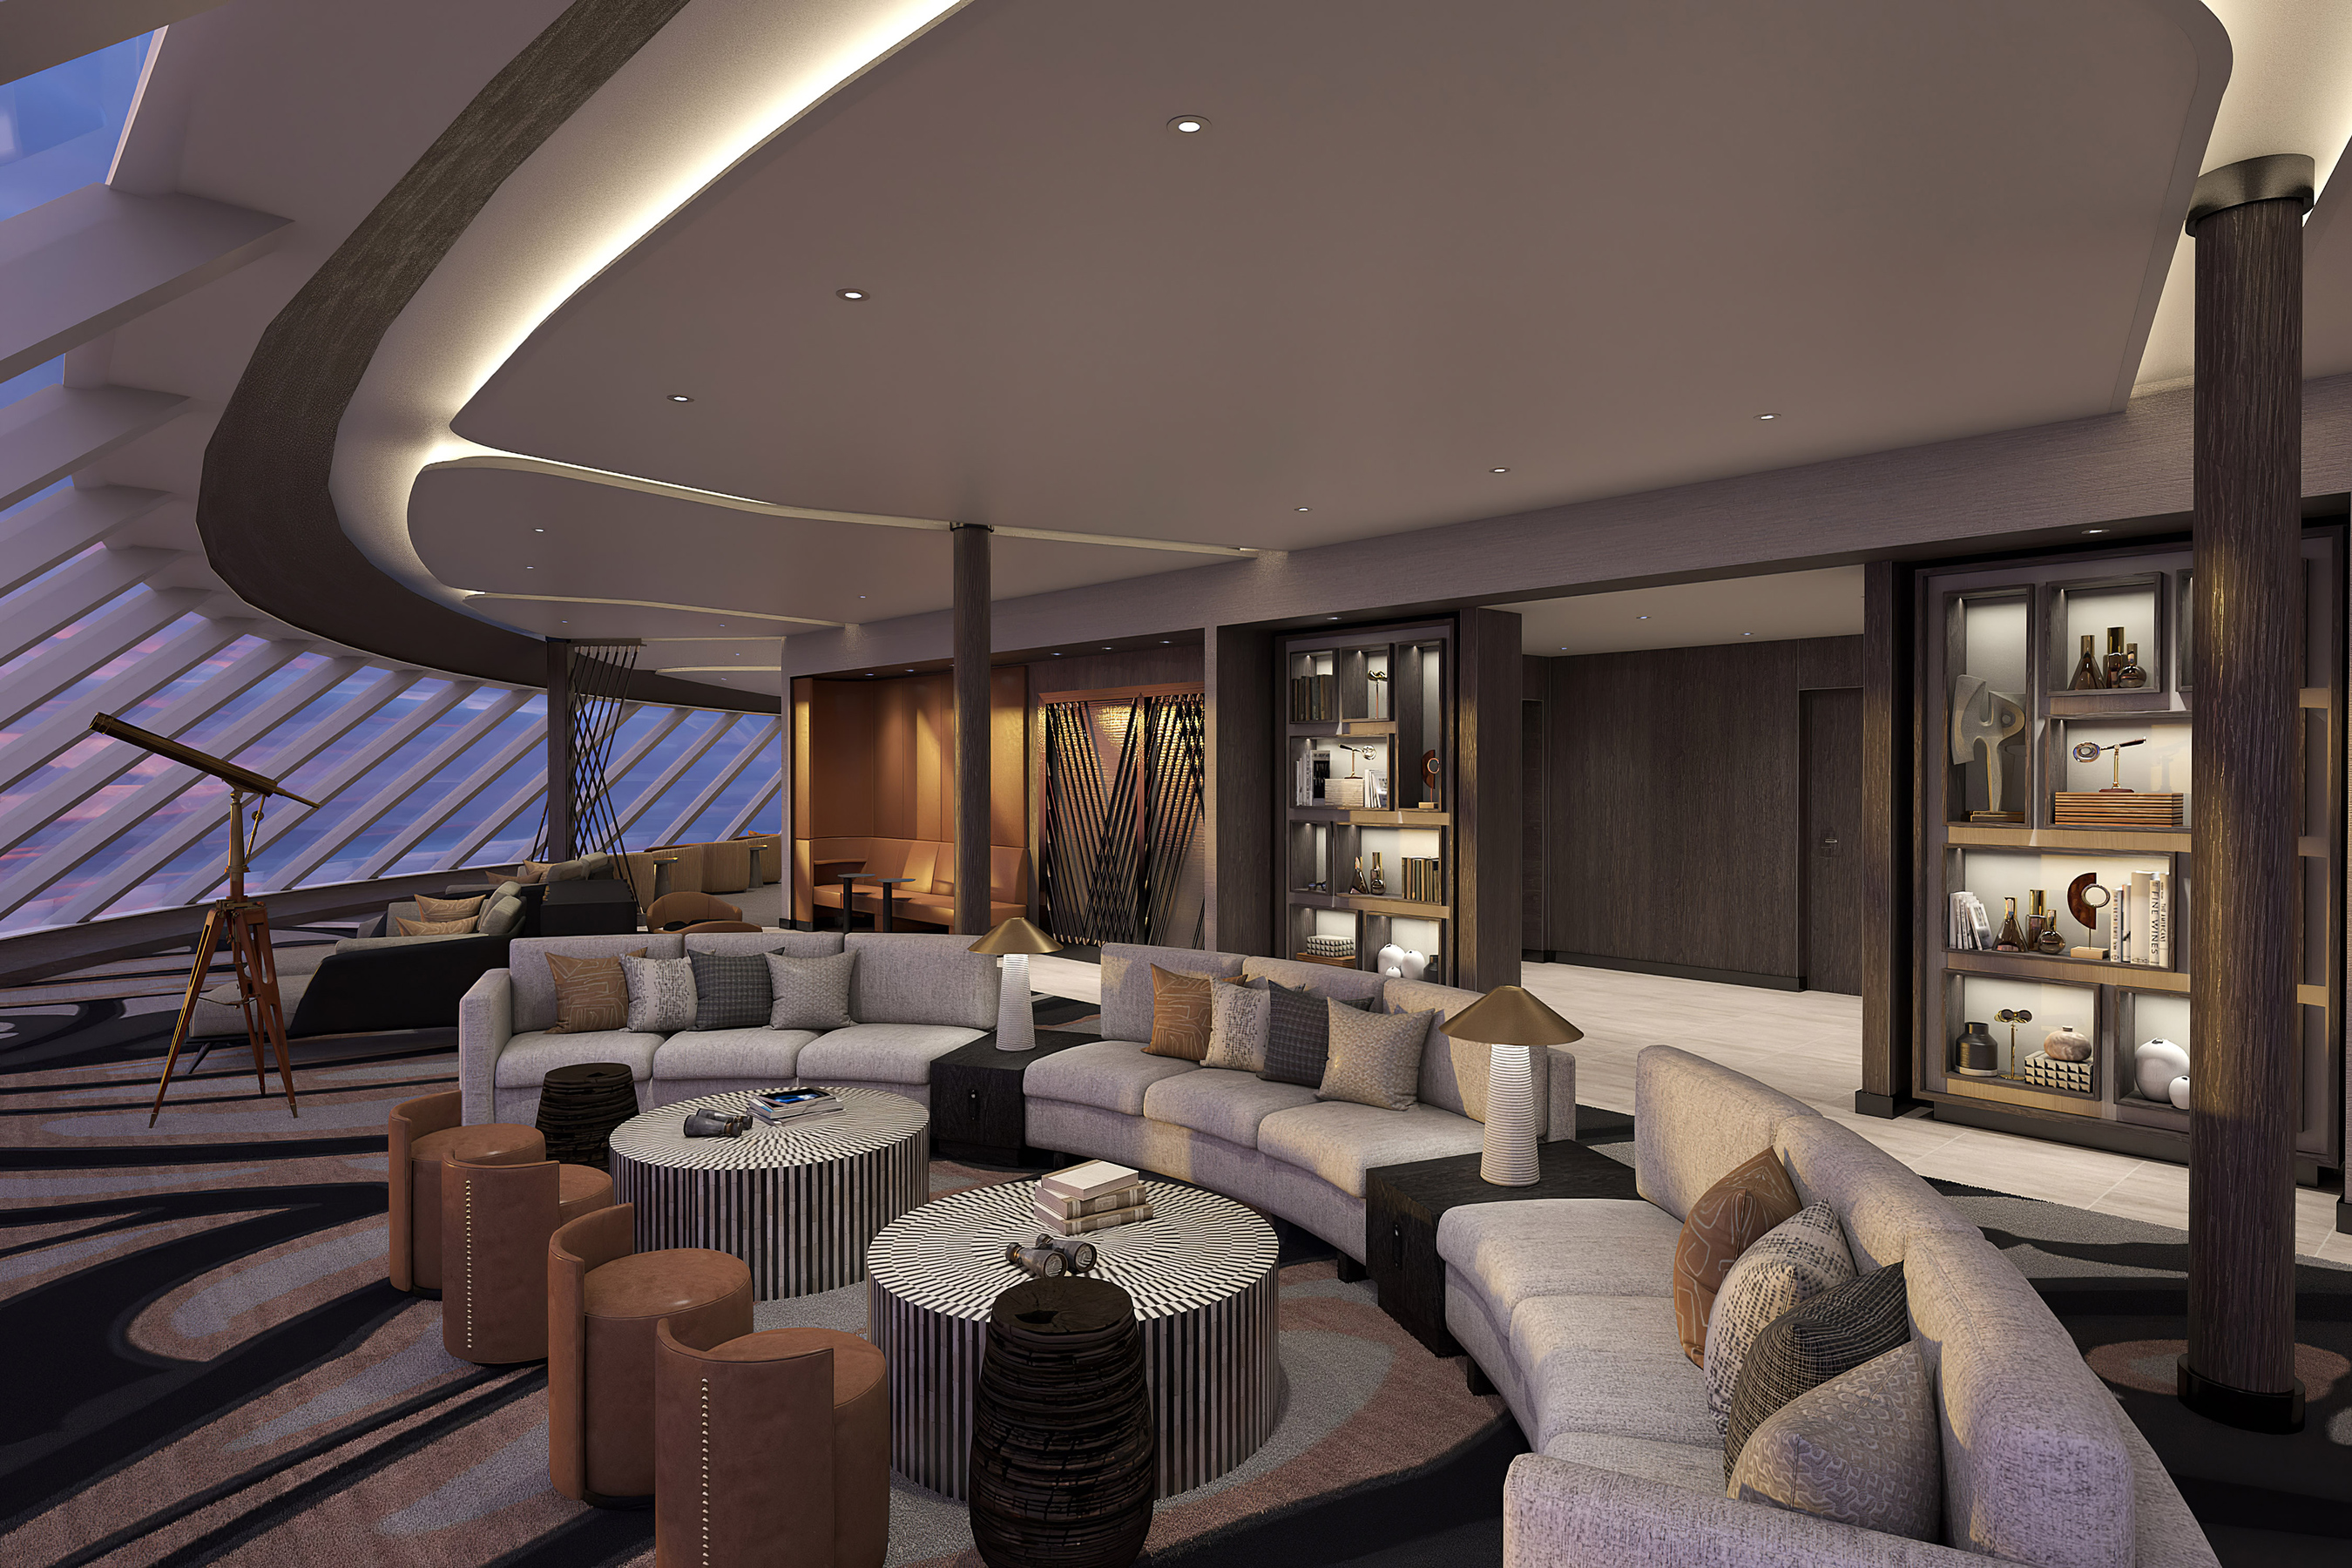 The guest-popular Observation Lounge will make a return on Norwegian Prima and Viva. The space, a multi-use refuge with different areas designated for lounging, and socializing, is designed to let the outside in with expansive views.